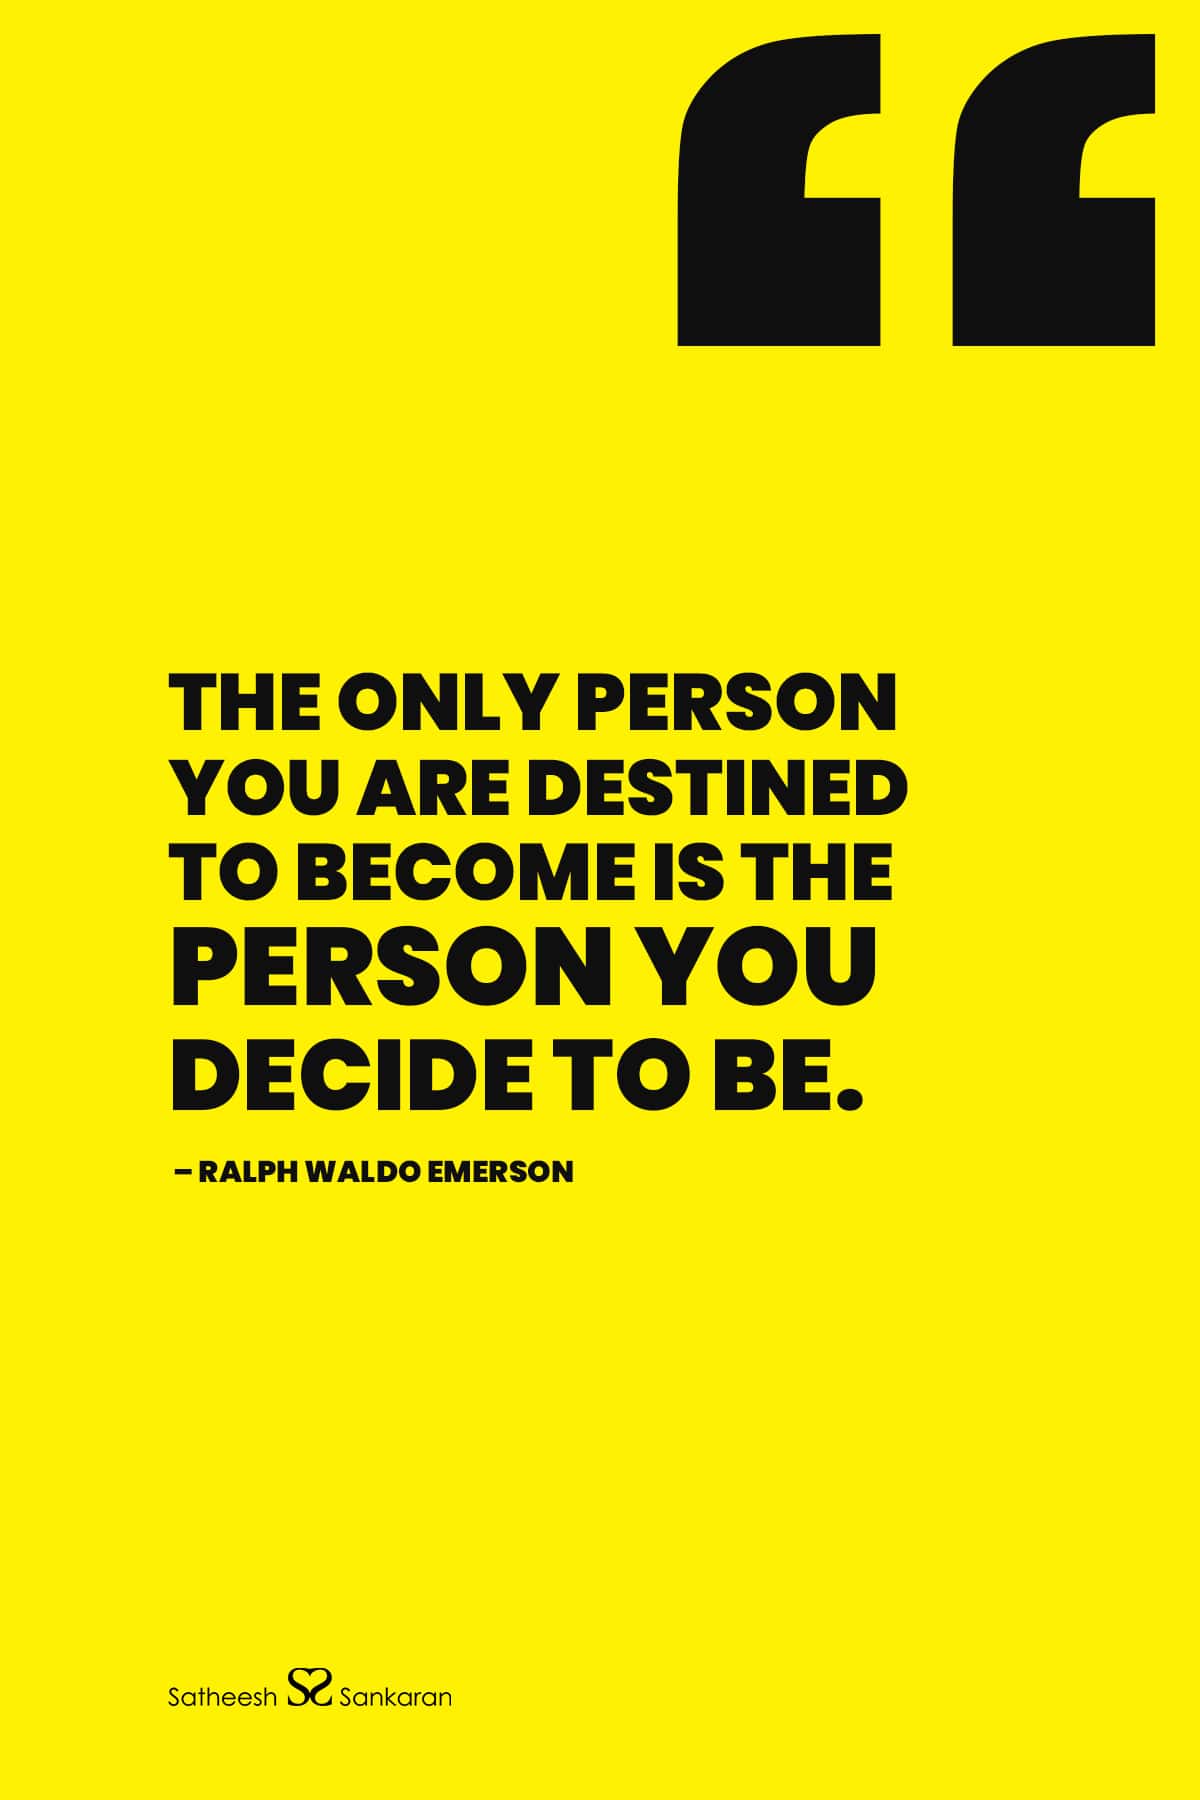 The only person you are destined to become is the person you decide to be. ― Ralph Waldo Emerson